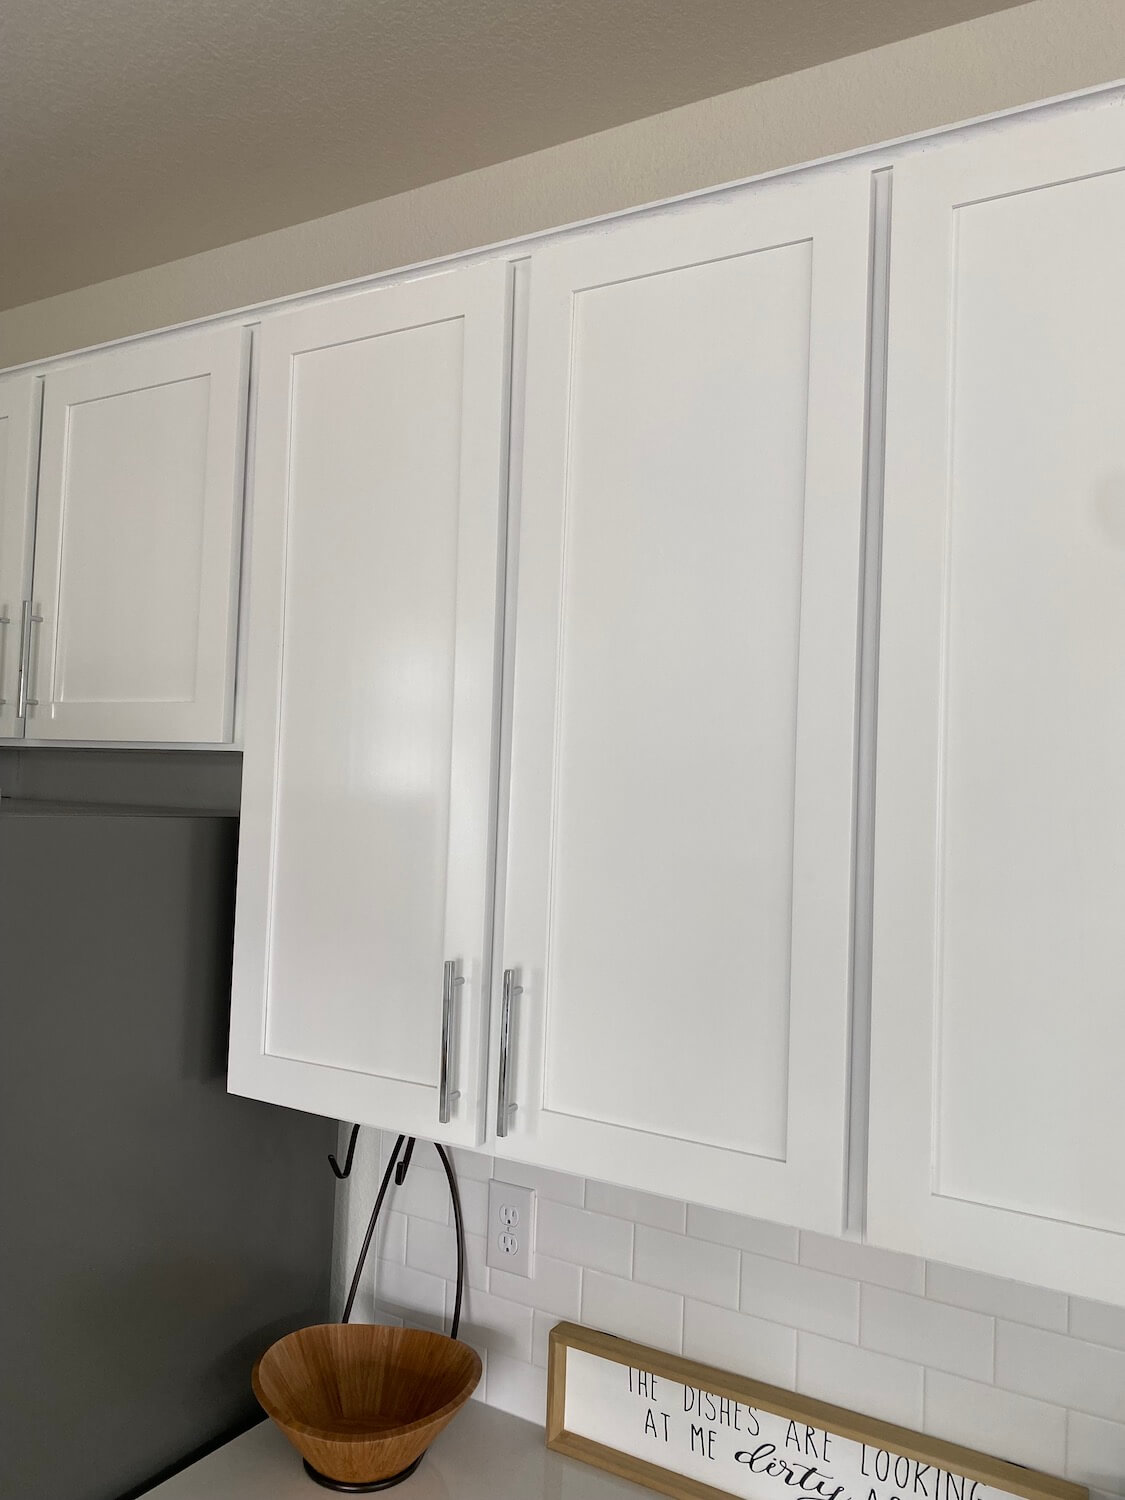 After-cabinet refacing to shaker style doors